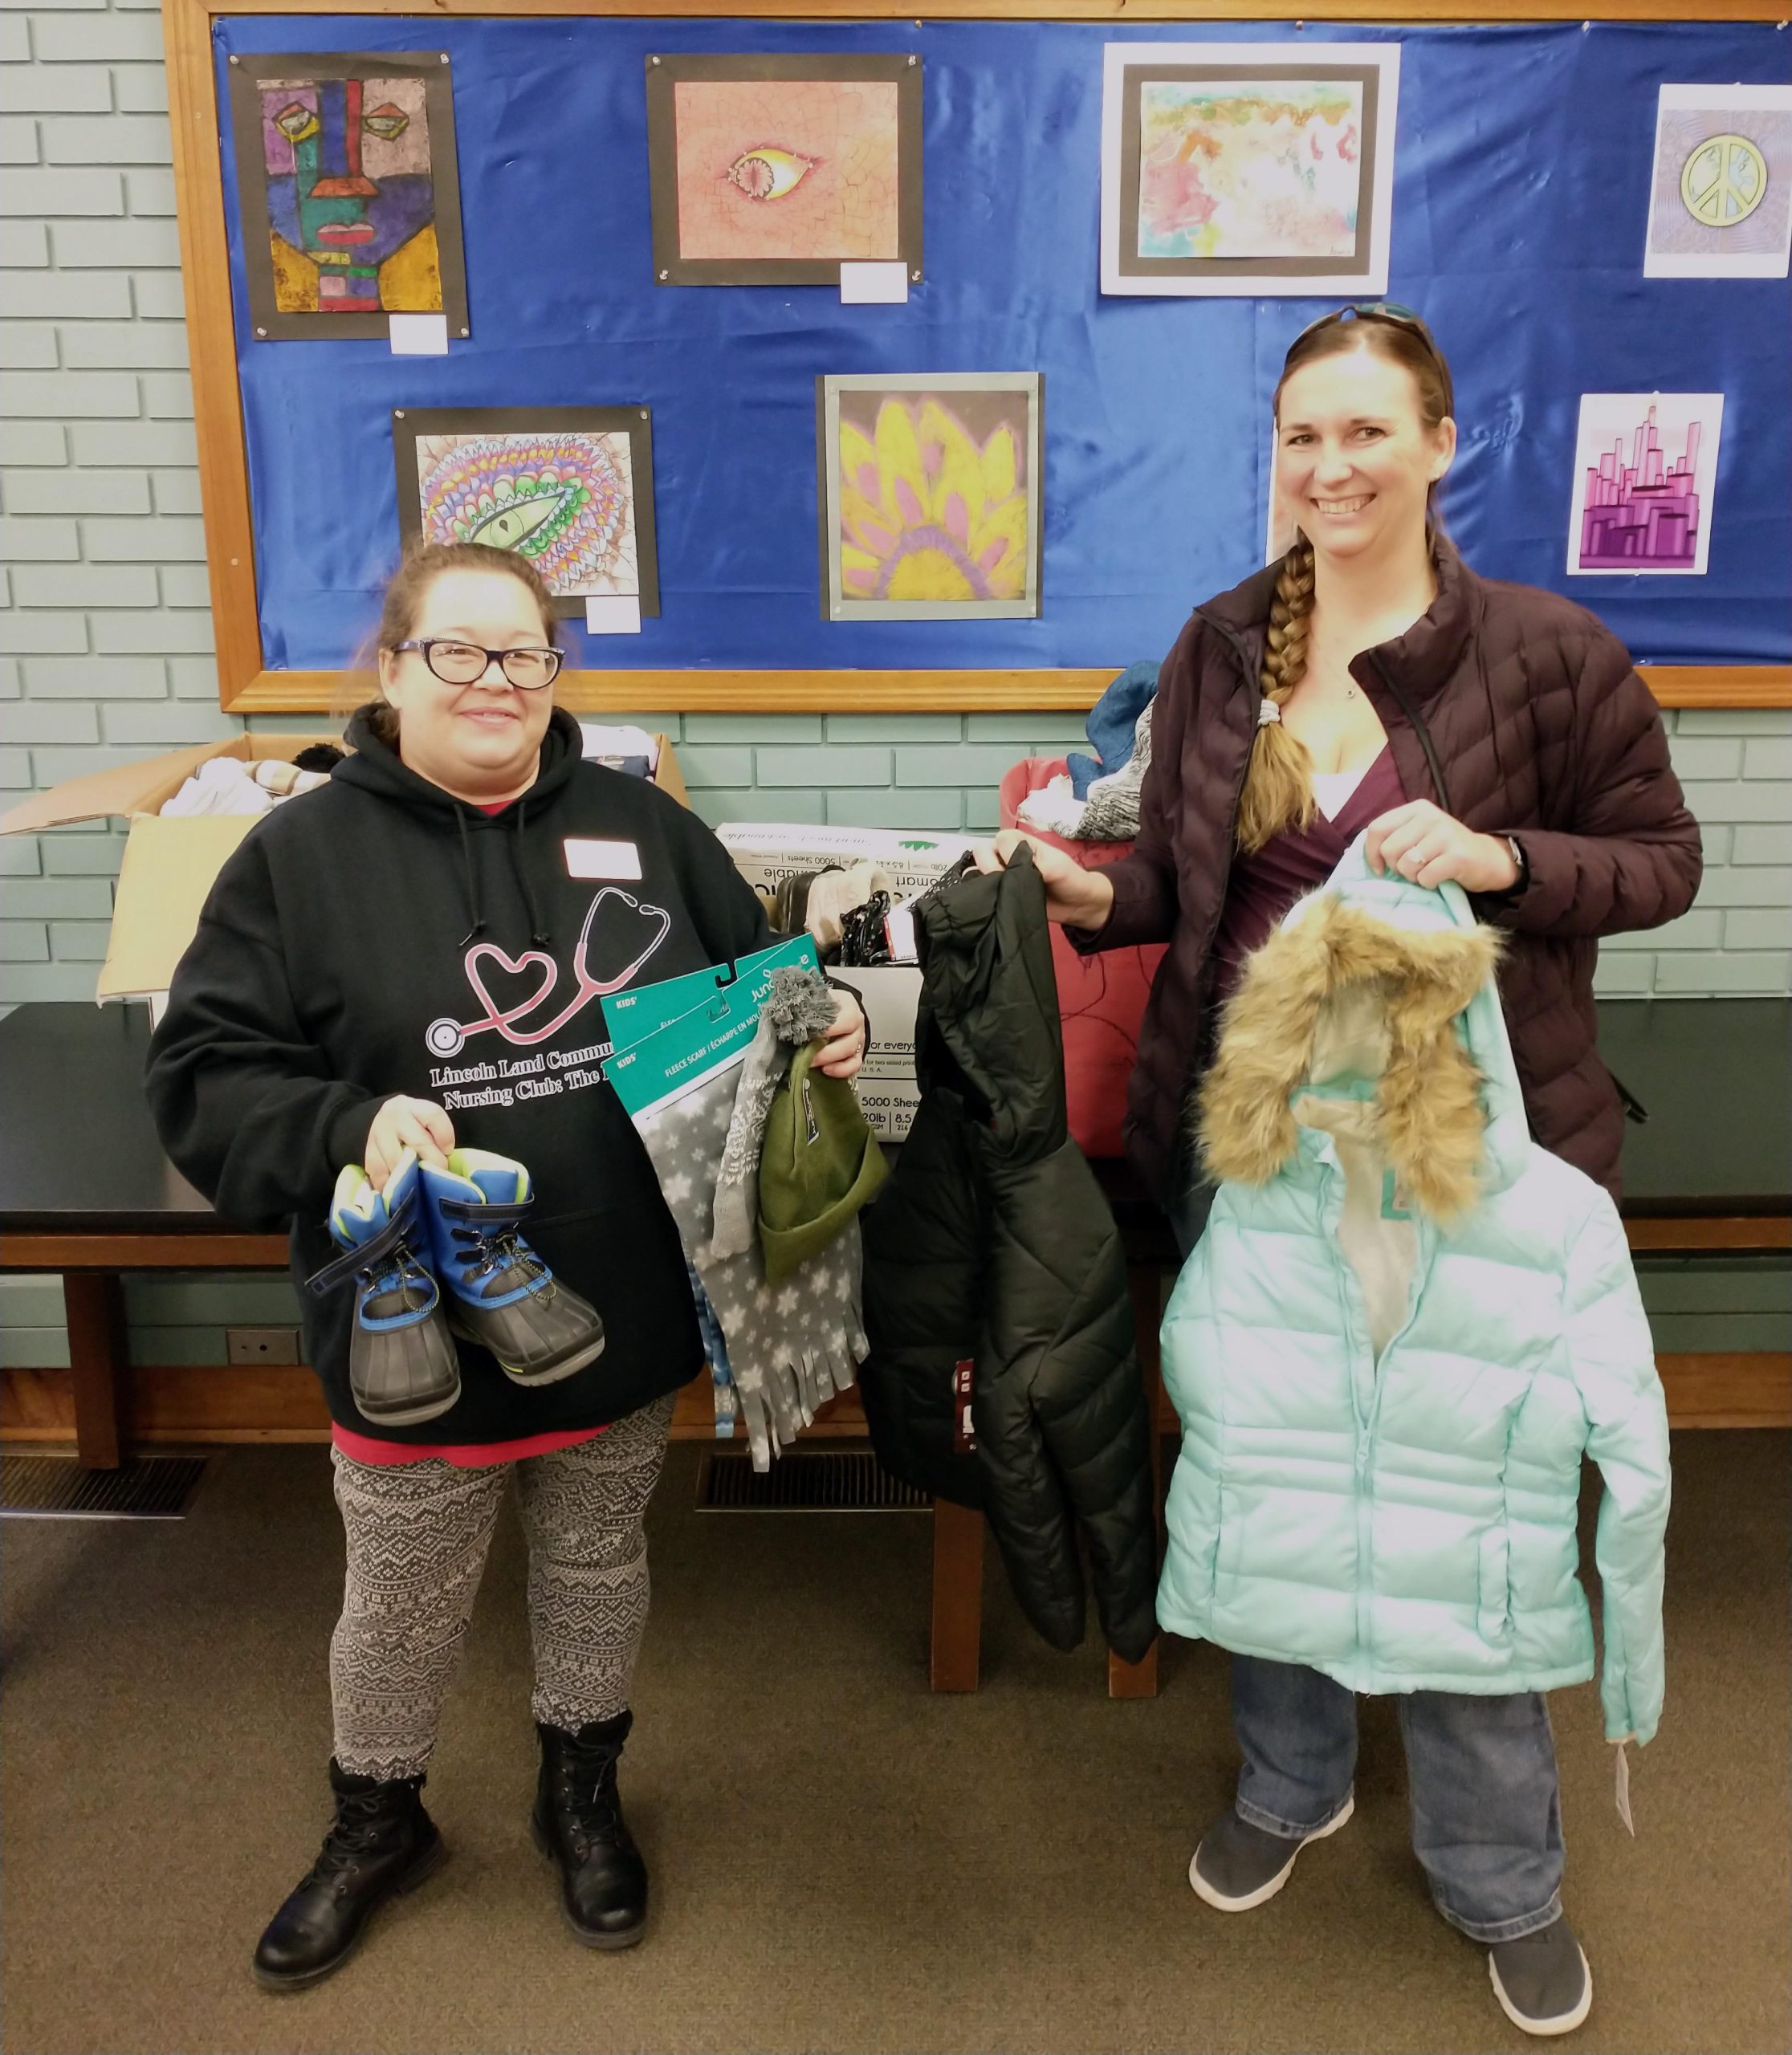 Kim Young and Sarina Sloman holding winter clothing to donate to District 186 schools.